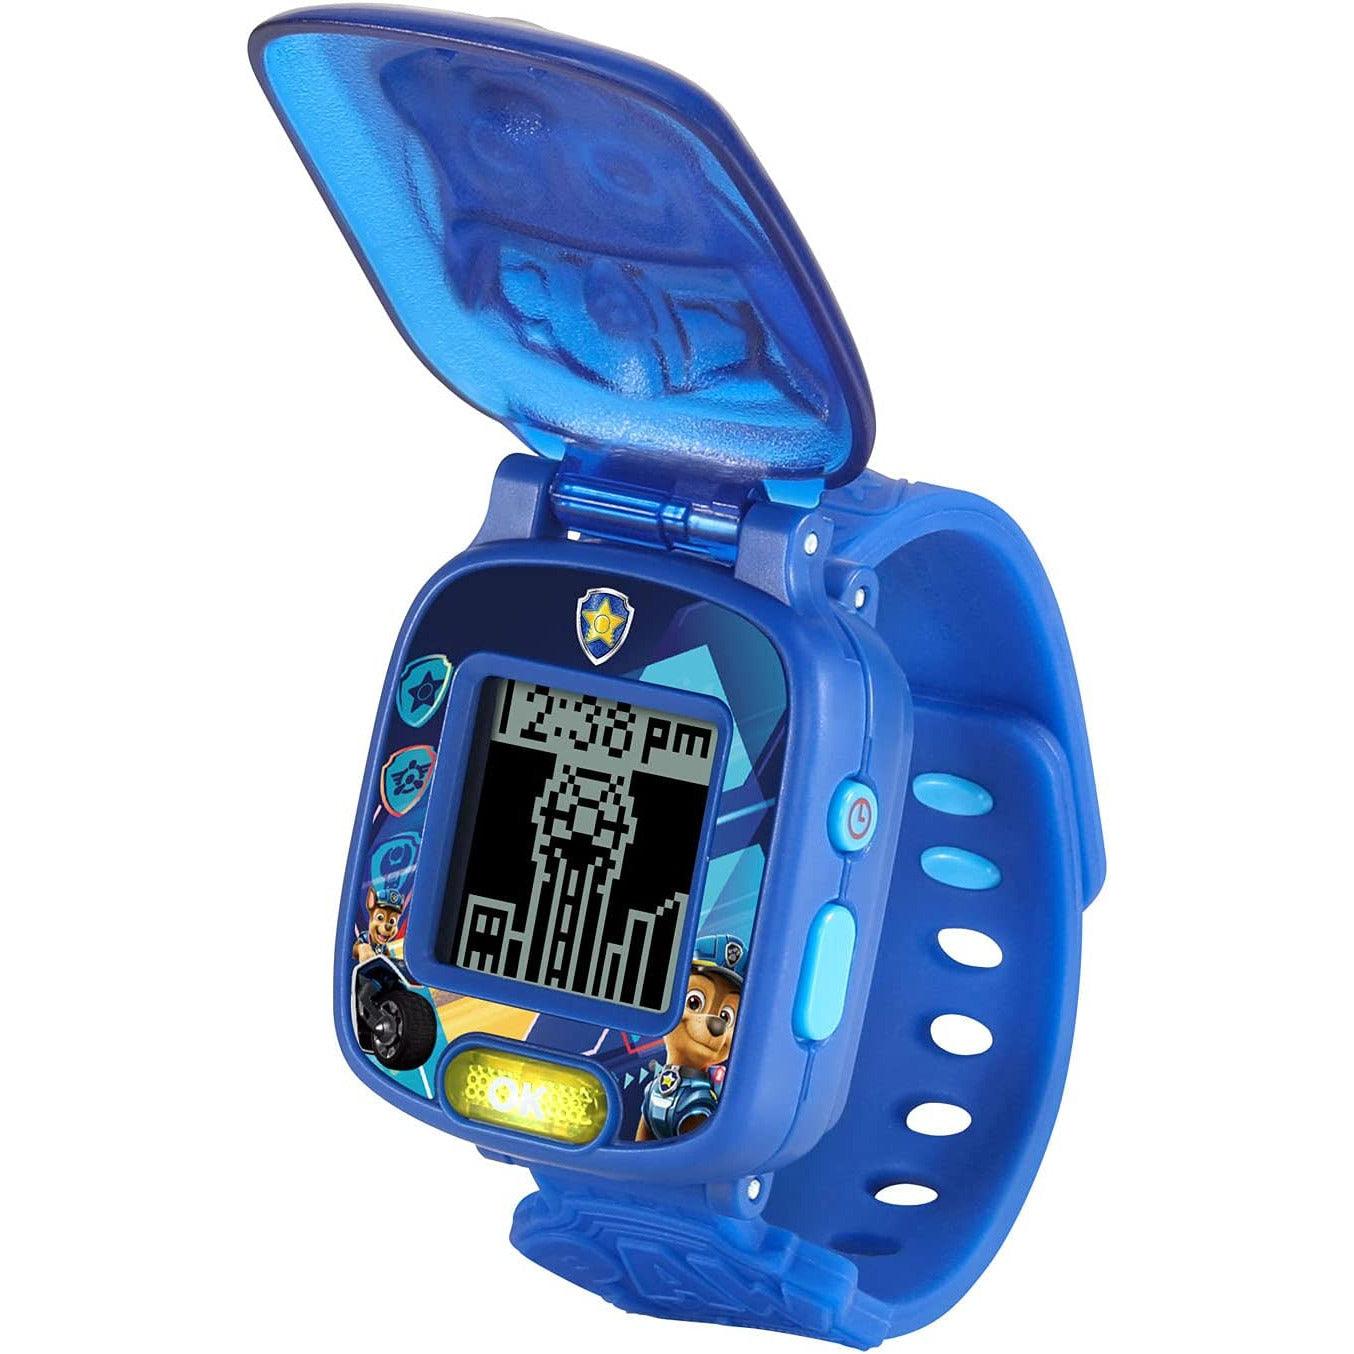 VTech PAW Patrol - The Movie Learning Watch, Chase for age 3-6 years - BumbleToys - 5-7 Years, Kids, Paw Patrol, Pre-Order, Watch